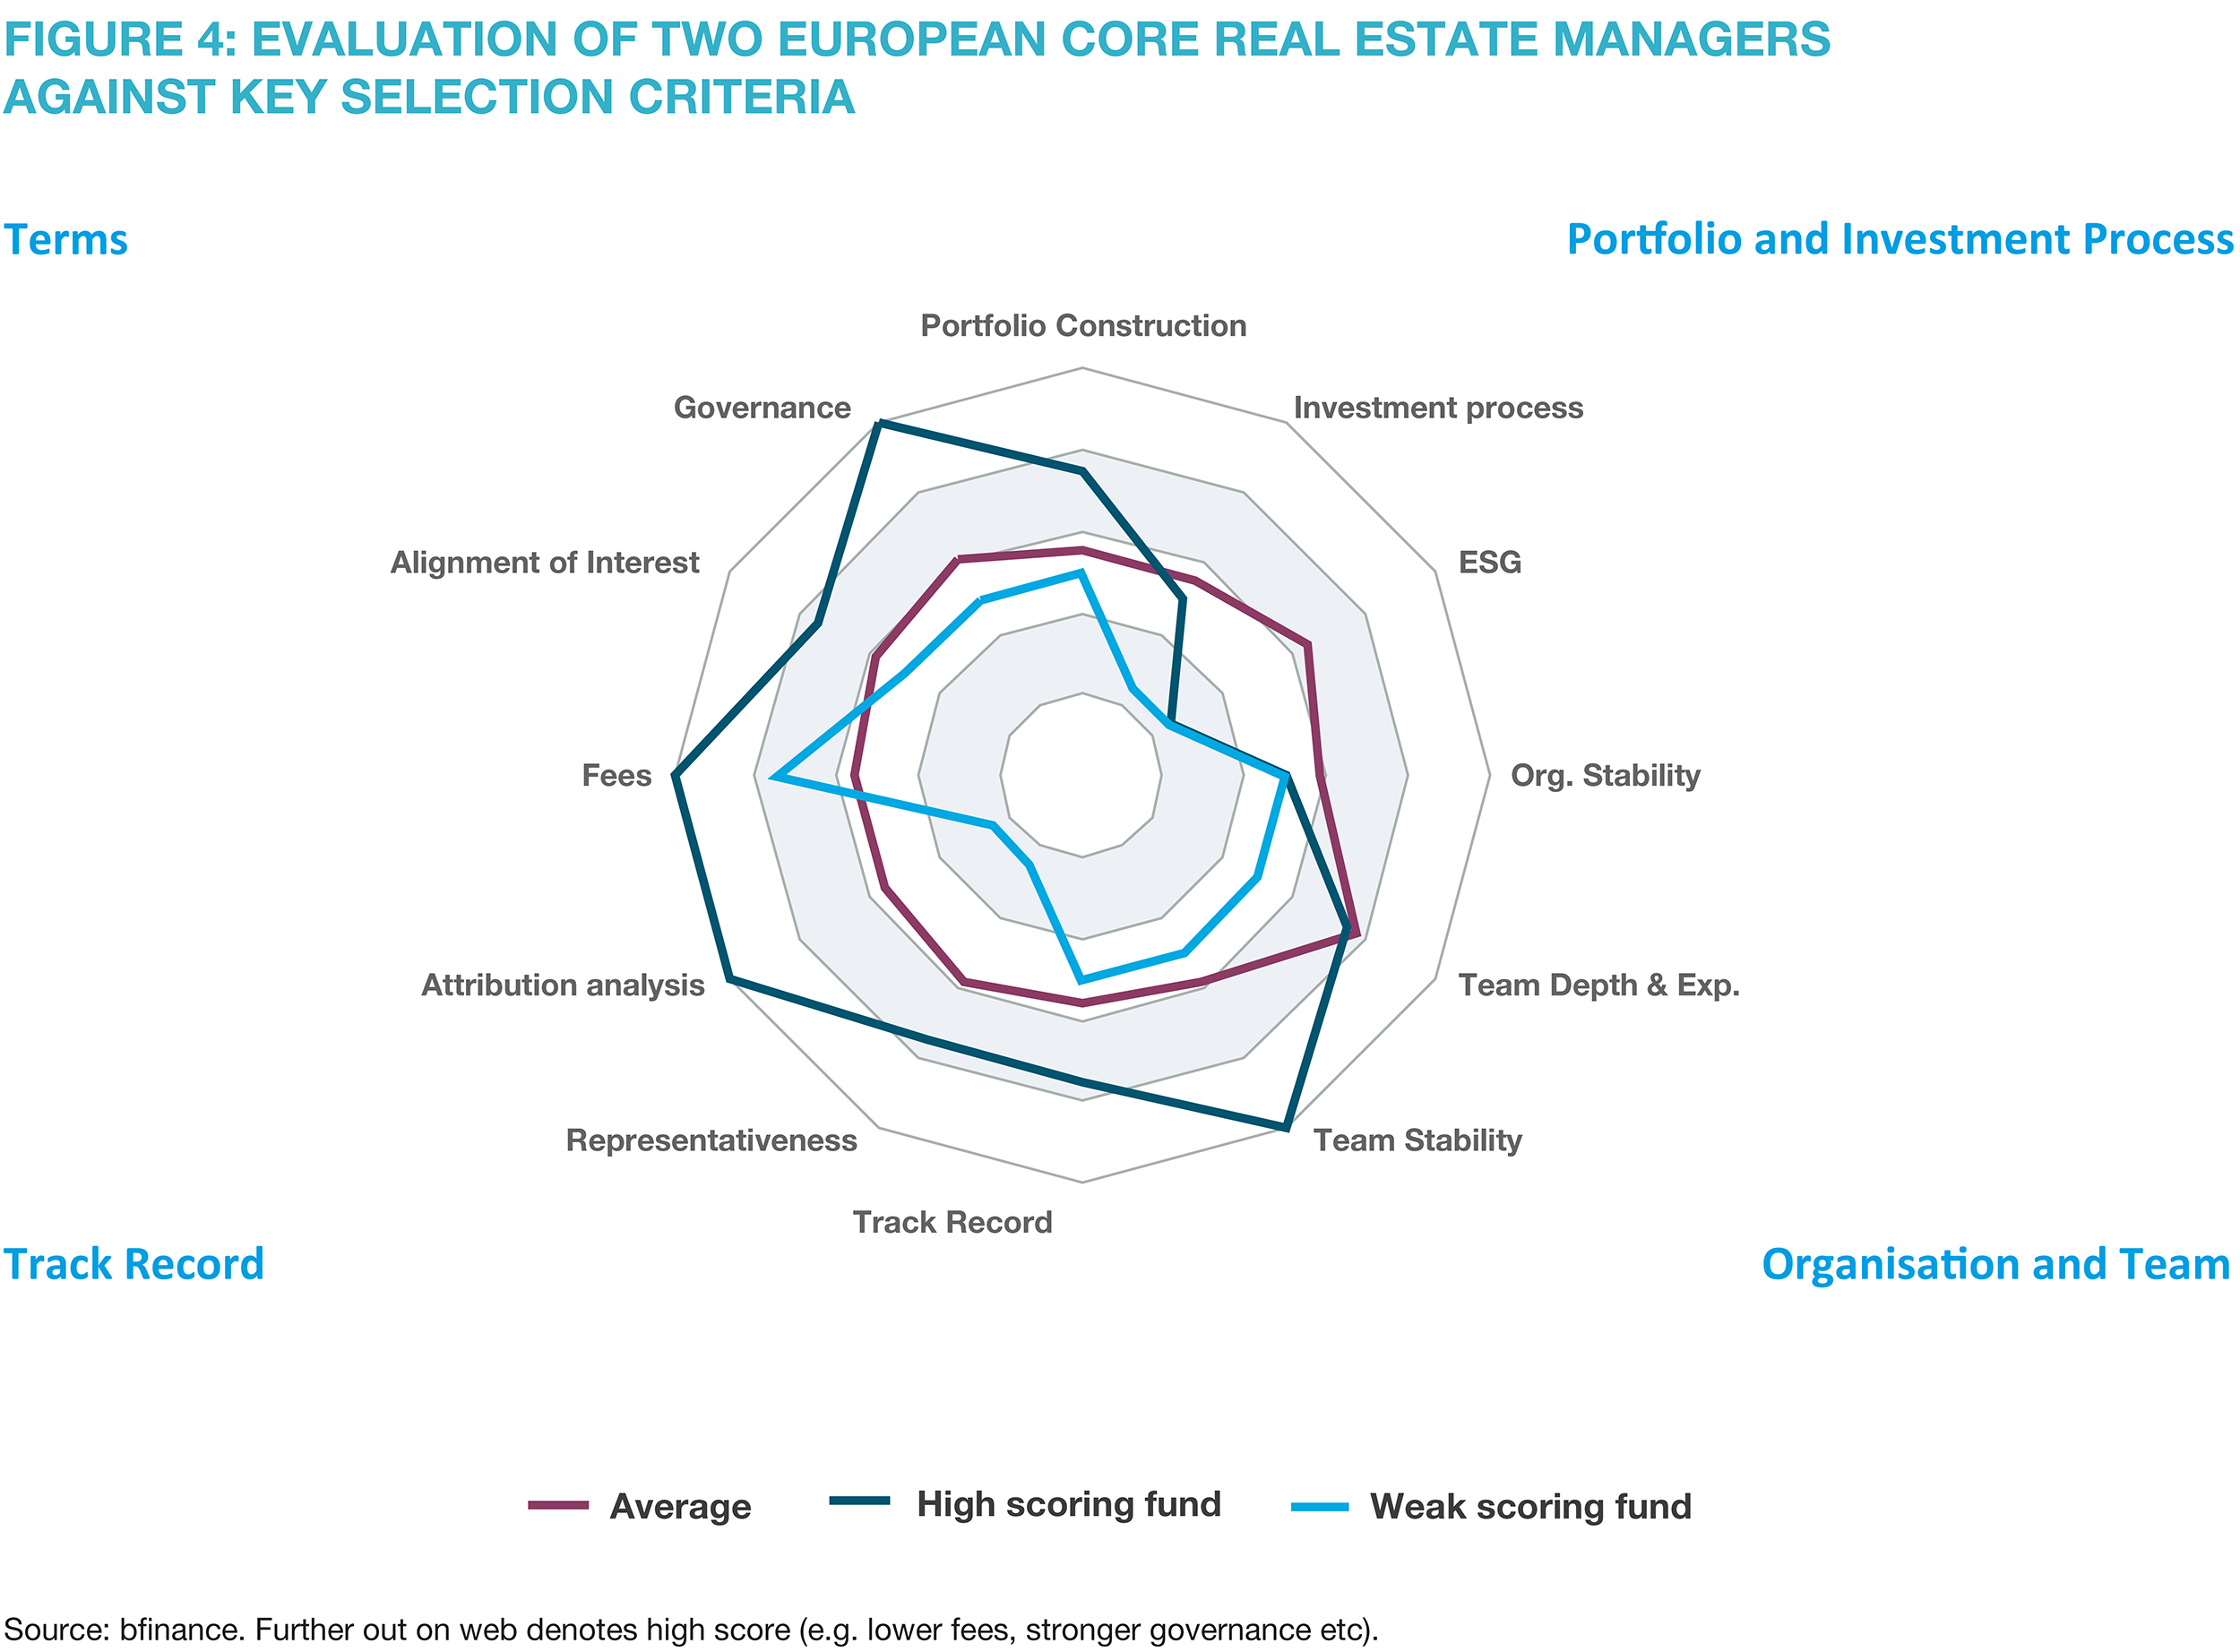 Evaluation of Two European Core Real Estate Managers